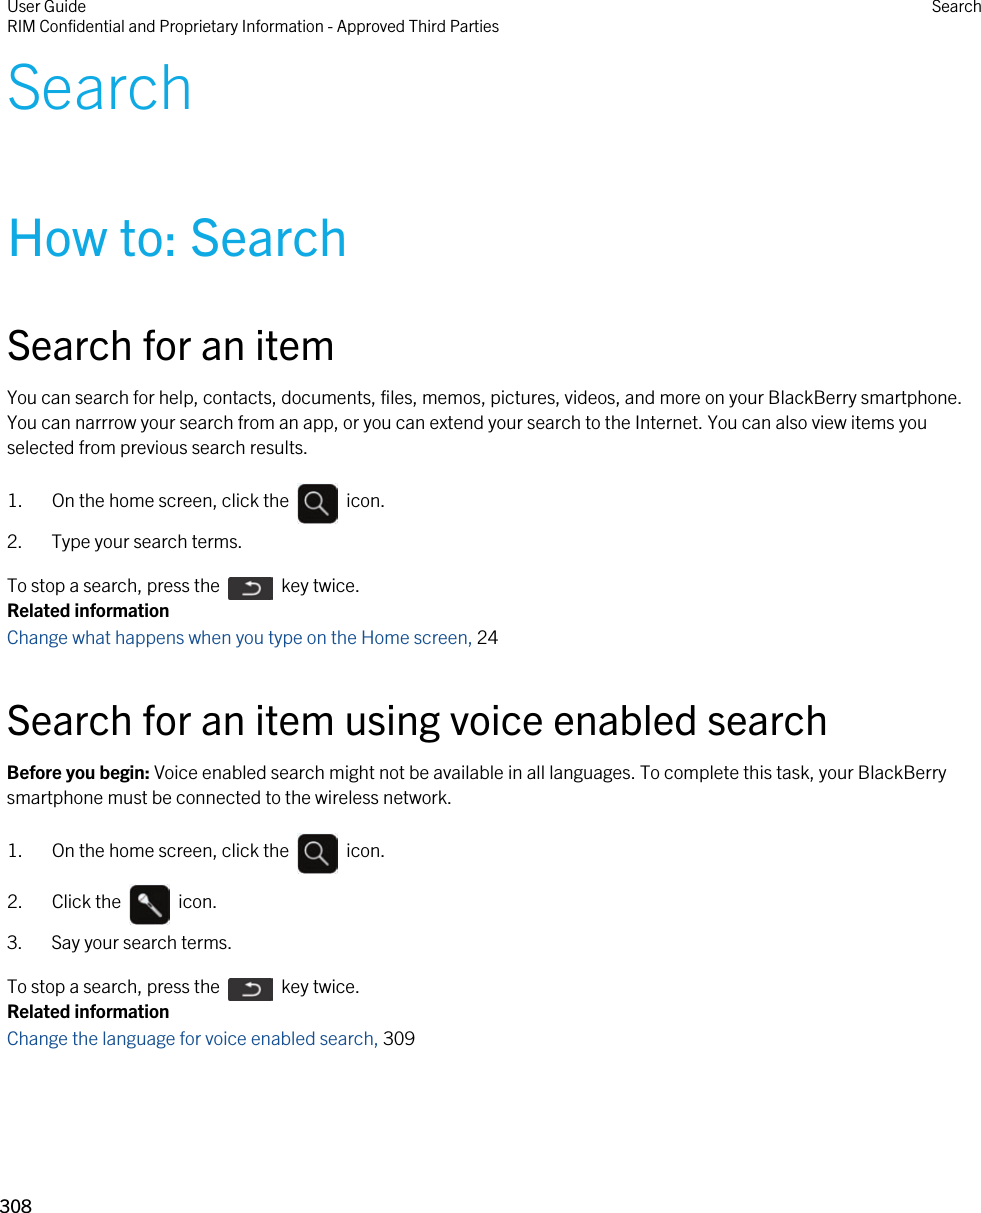 SearchHow to: SearchSearch for an itemYou can search for help, contacts, documents, files, memos, pictures, videos, and more on your BlackBerry smartphone. You can narrrow your search from an app, or you can extend your search to the Internet. You can also view items you selected from previous search results.1.  On the home screen, click the    icon. 2. Type your search terms.To stop a search, press the    key twice.Related informationChange what happens when you type on the Home screen, 24 Search for an item using voice enabled searchBefore you begin: Voice enabled search might not be available in all languages. To complete this task, your BlackBerry smartphone must be connected to the wireless network.1.  On the home screen, click the    icon. 2.  Click the    icon. 3. Say your search terms.To stop a search, press the    key twice.Related informationChange the language for voice enabled search, 309User GuideRIM Confidential and Proprietary Information - Approved Third Parties Search308 